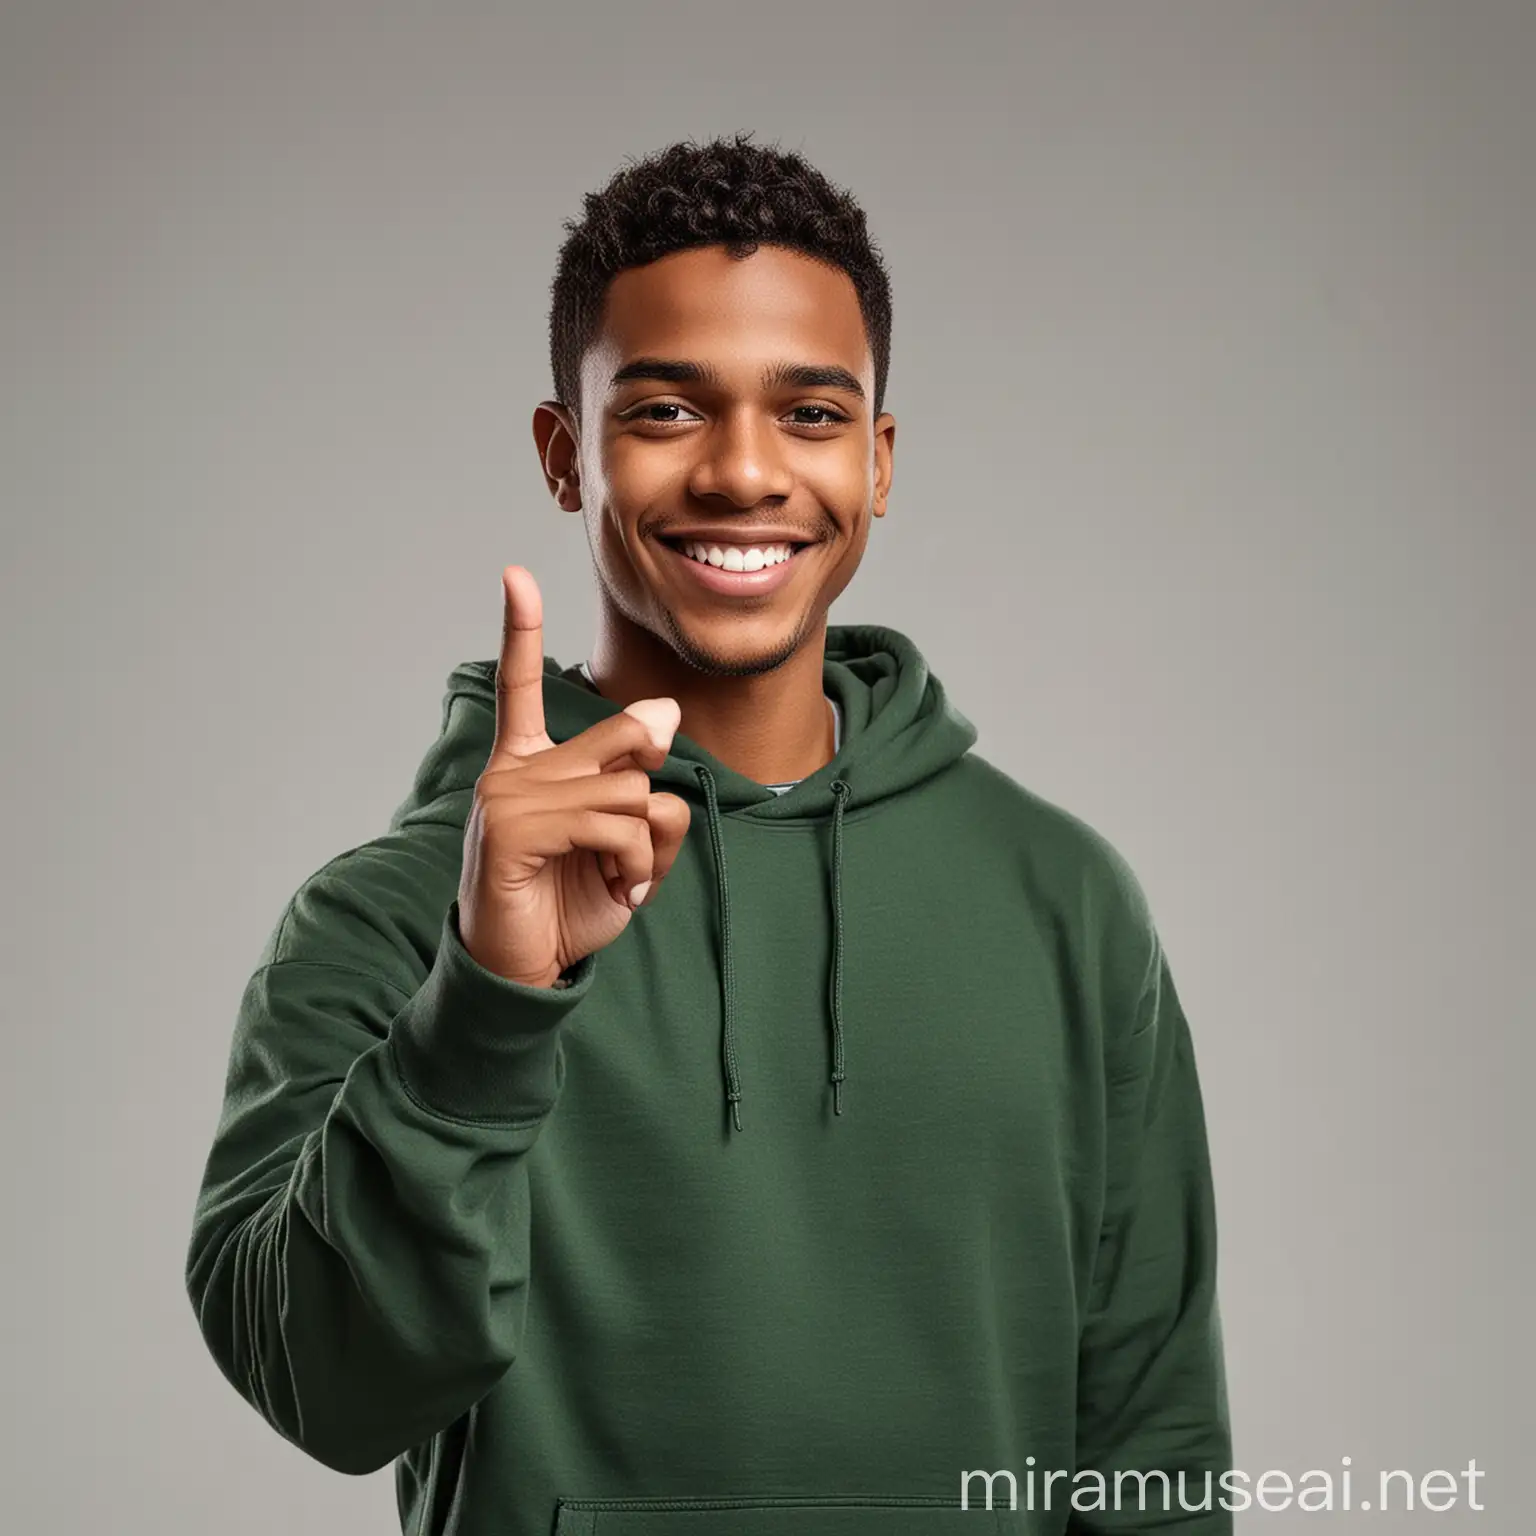 Smiling Dark Skin Young Man in Dark Green Hoodie Doing Thats Right Gesture